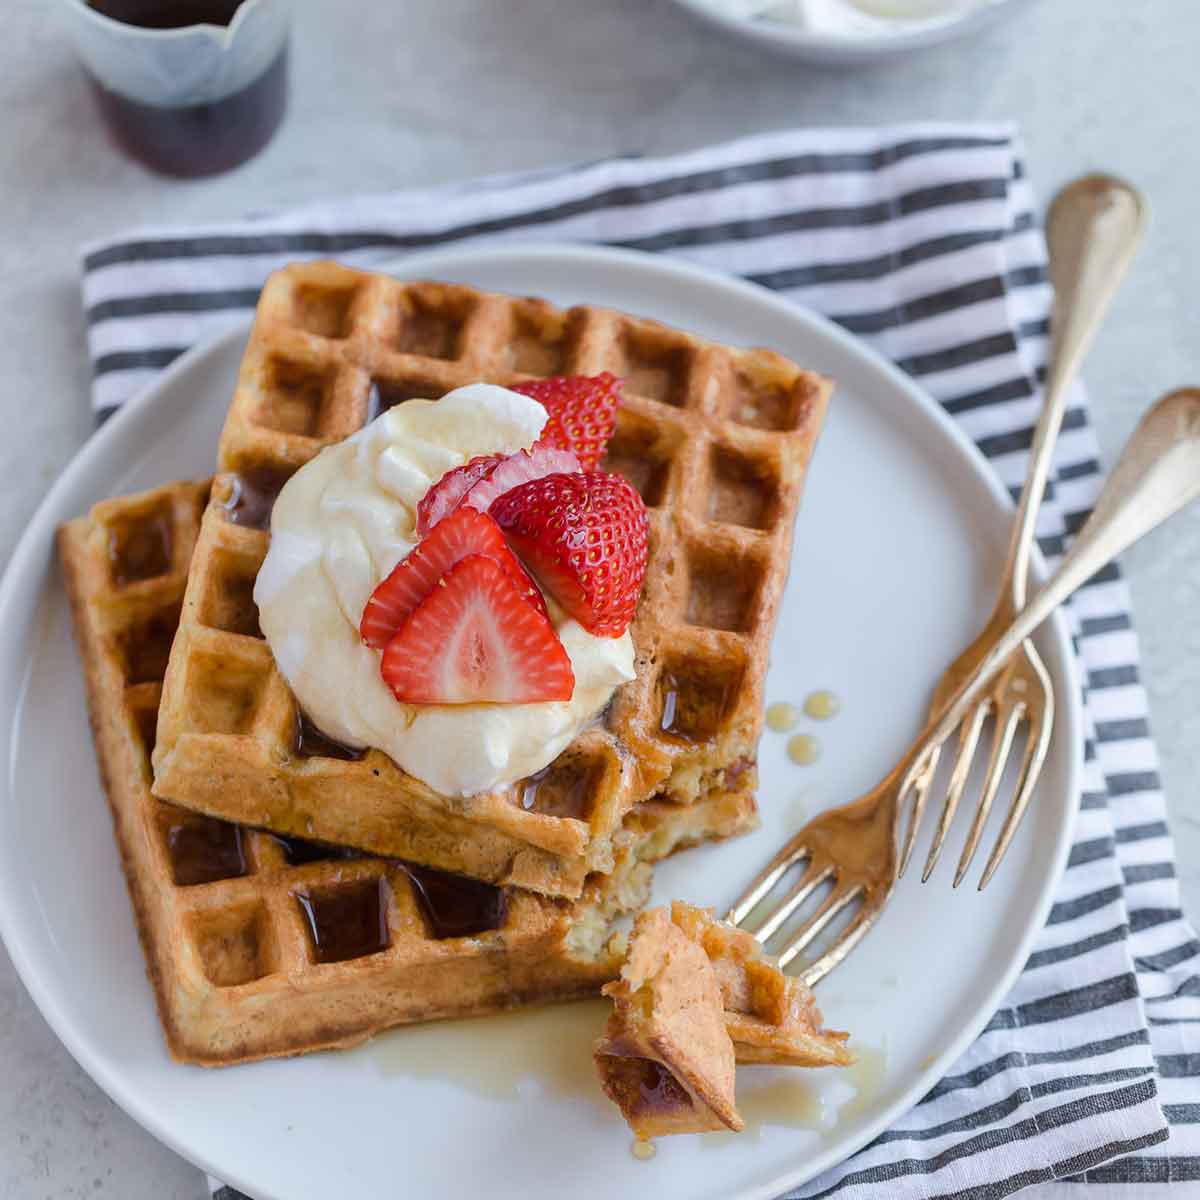 Two buttermilk waffles with whipped cream. strawberries, and maple syrup on top.